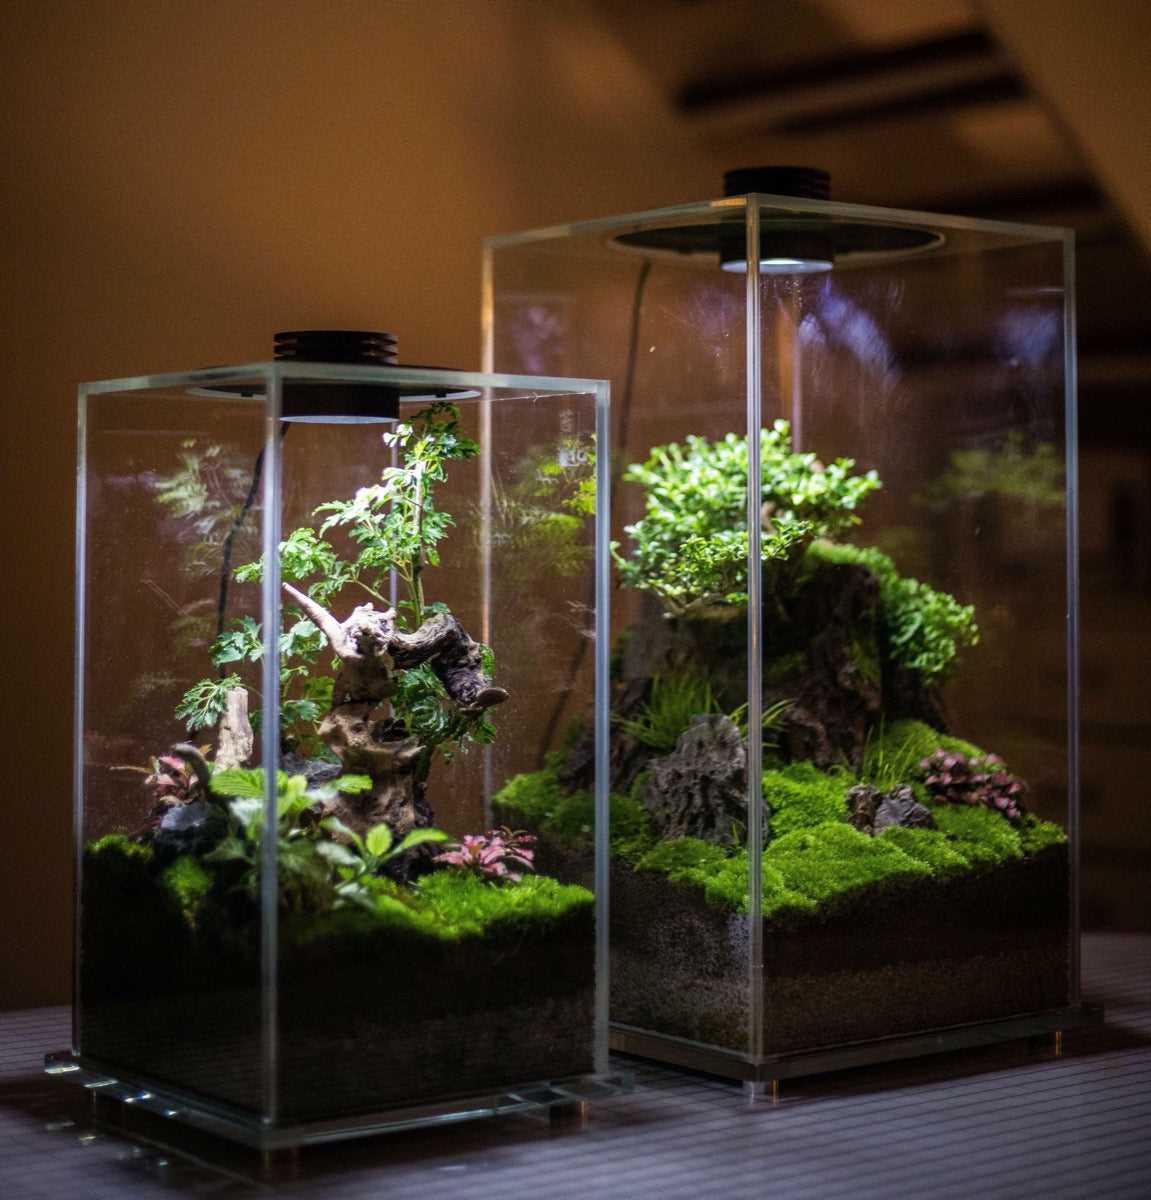 Tips for Properly Installing and Maintaining Terrarium Lighting